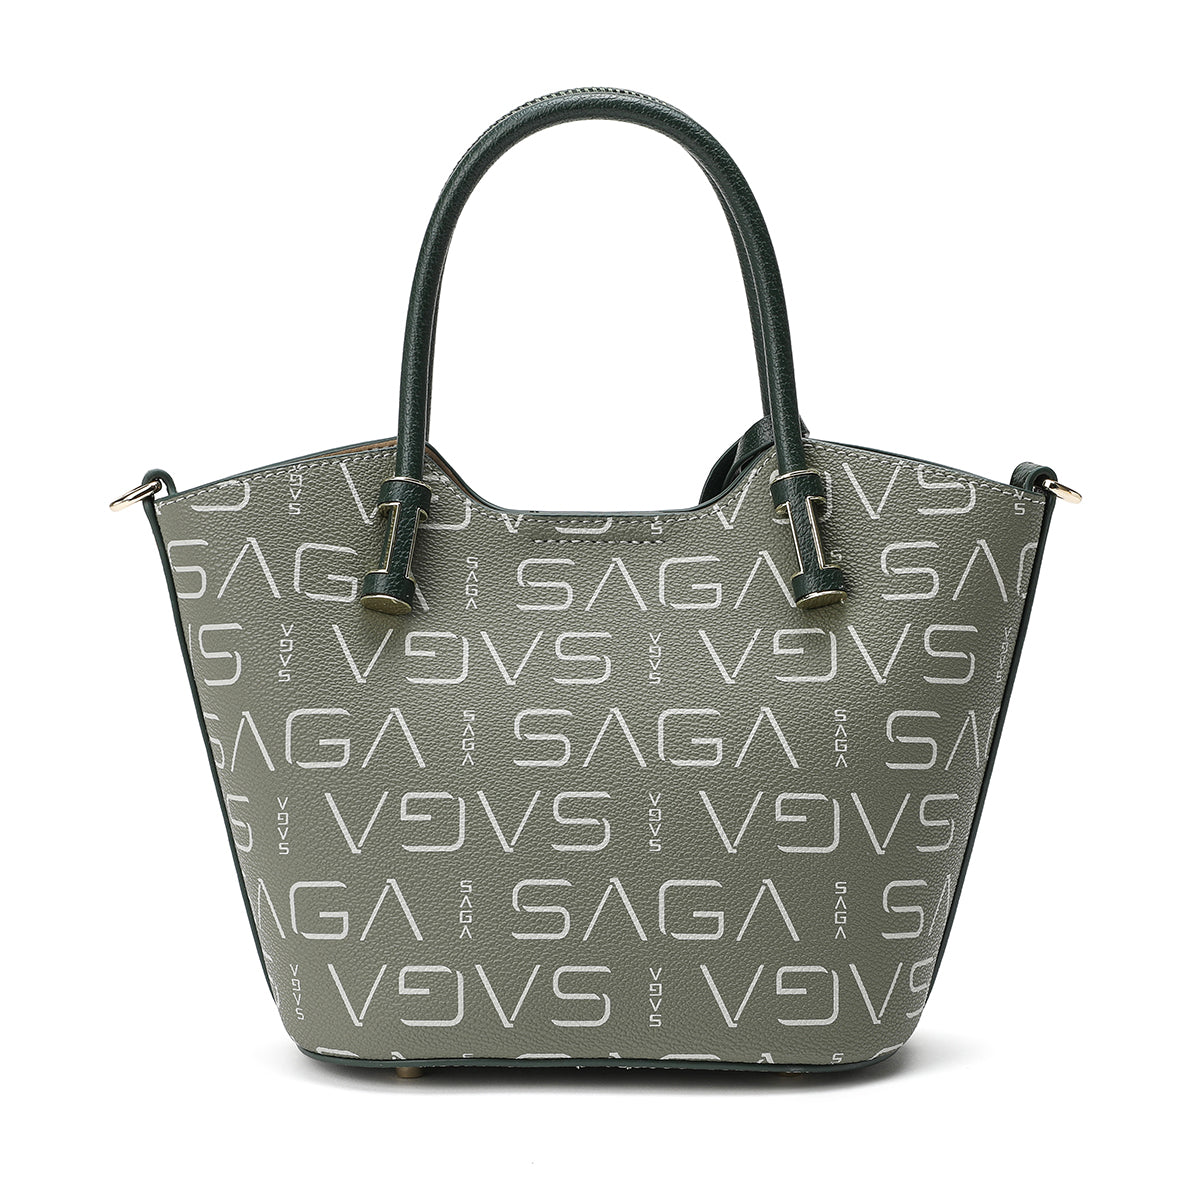 Elegant women's handbag with a monogram print in olive green with a detachable strap